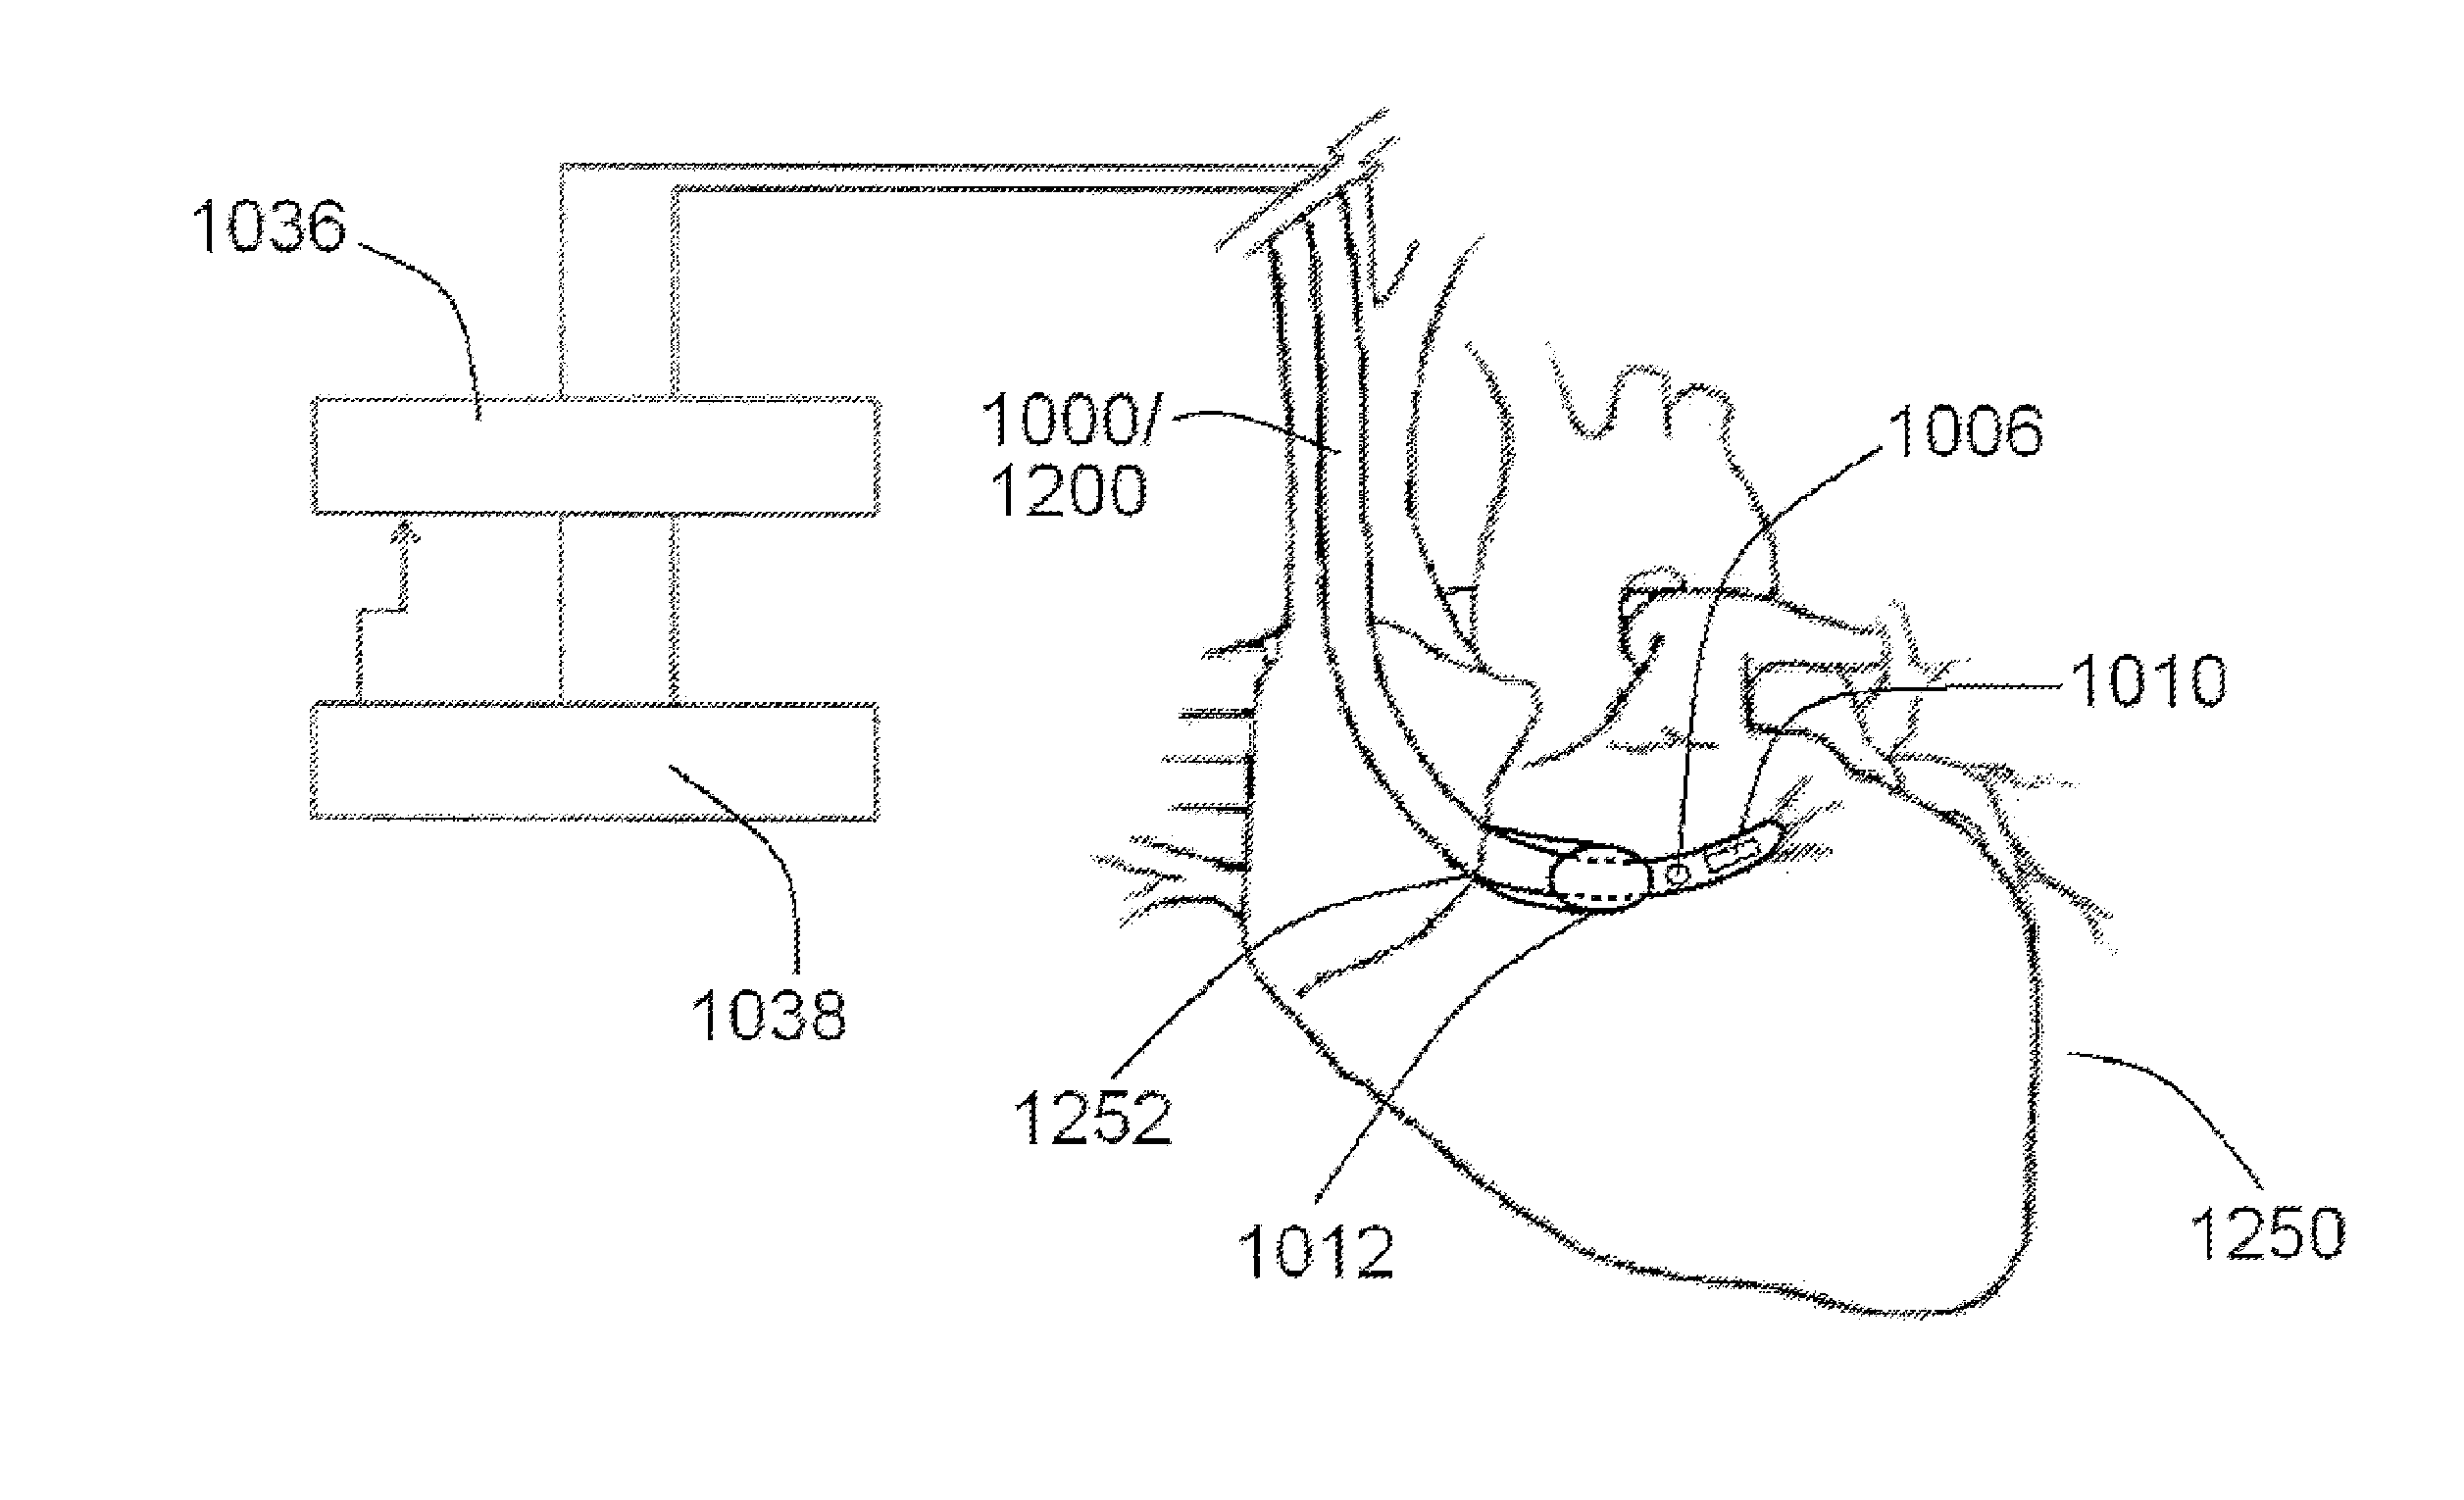 Impedance devices and methods of using the same in connection with a mammalian vasculature